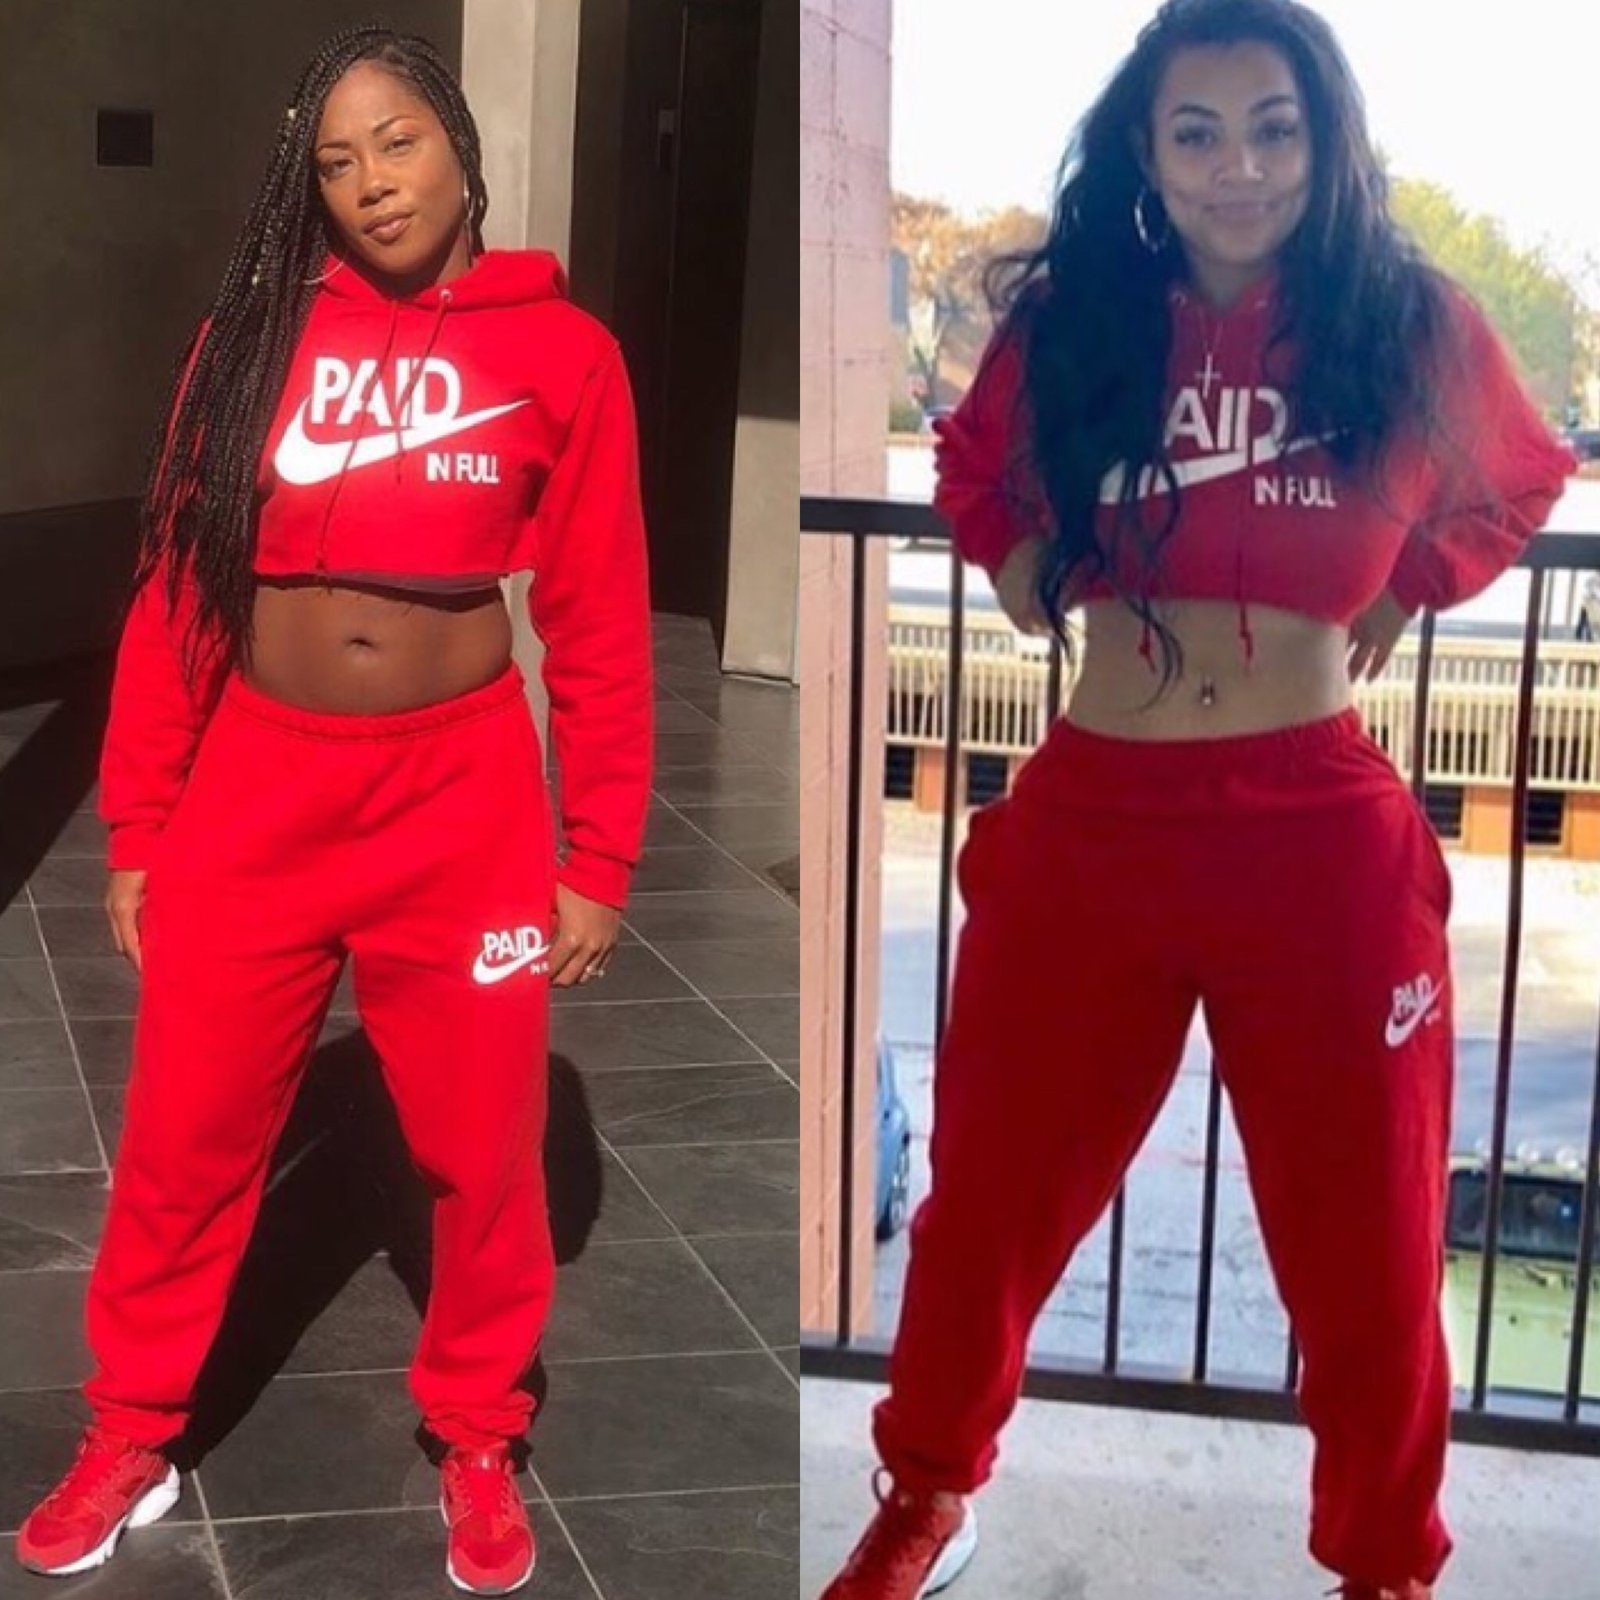 red sweatsuit